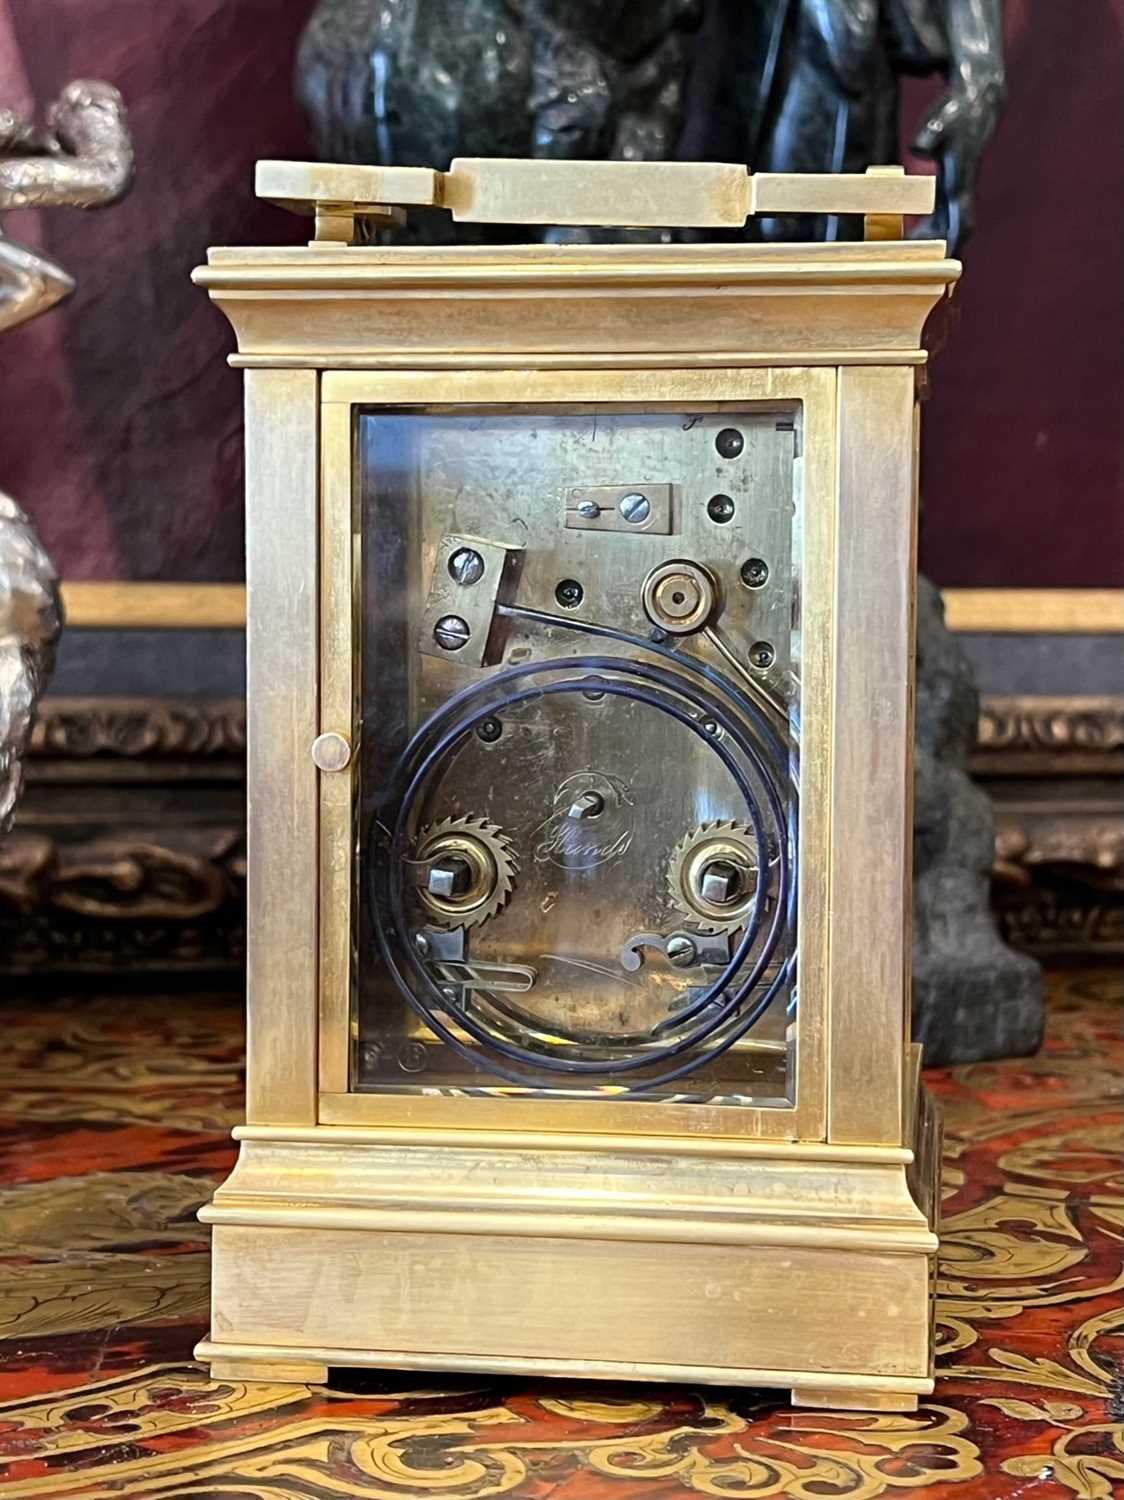 A FINE LATE 19TH CENTURY FRENCH CARRIAGE CLOCK WITH SIILVERED ENGRAVED PANELS - Image 2 of 6